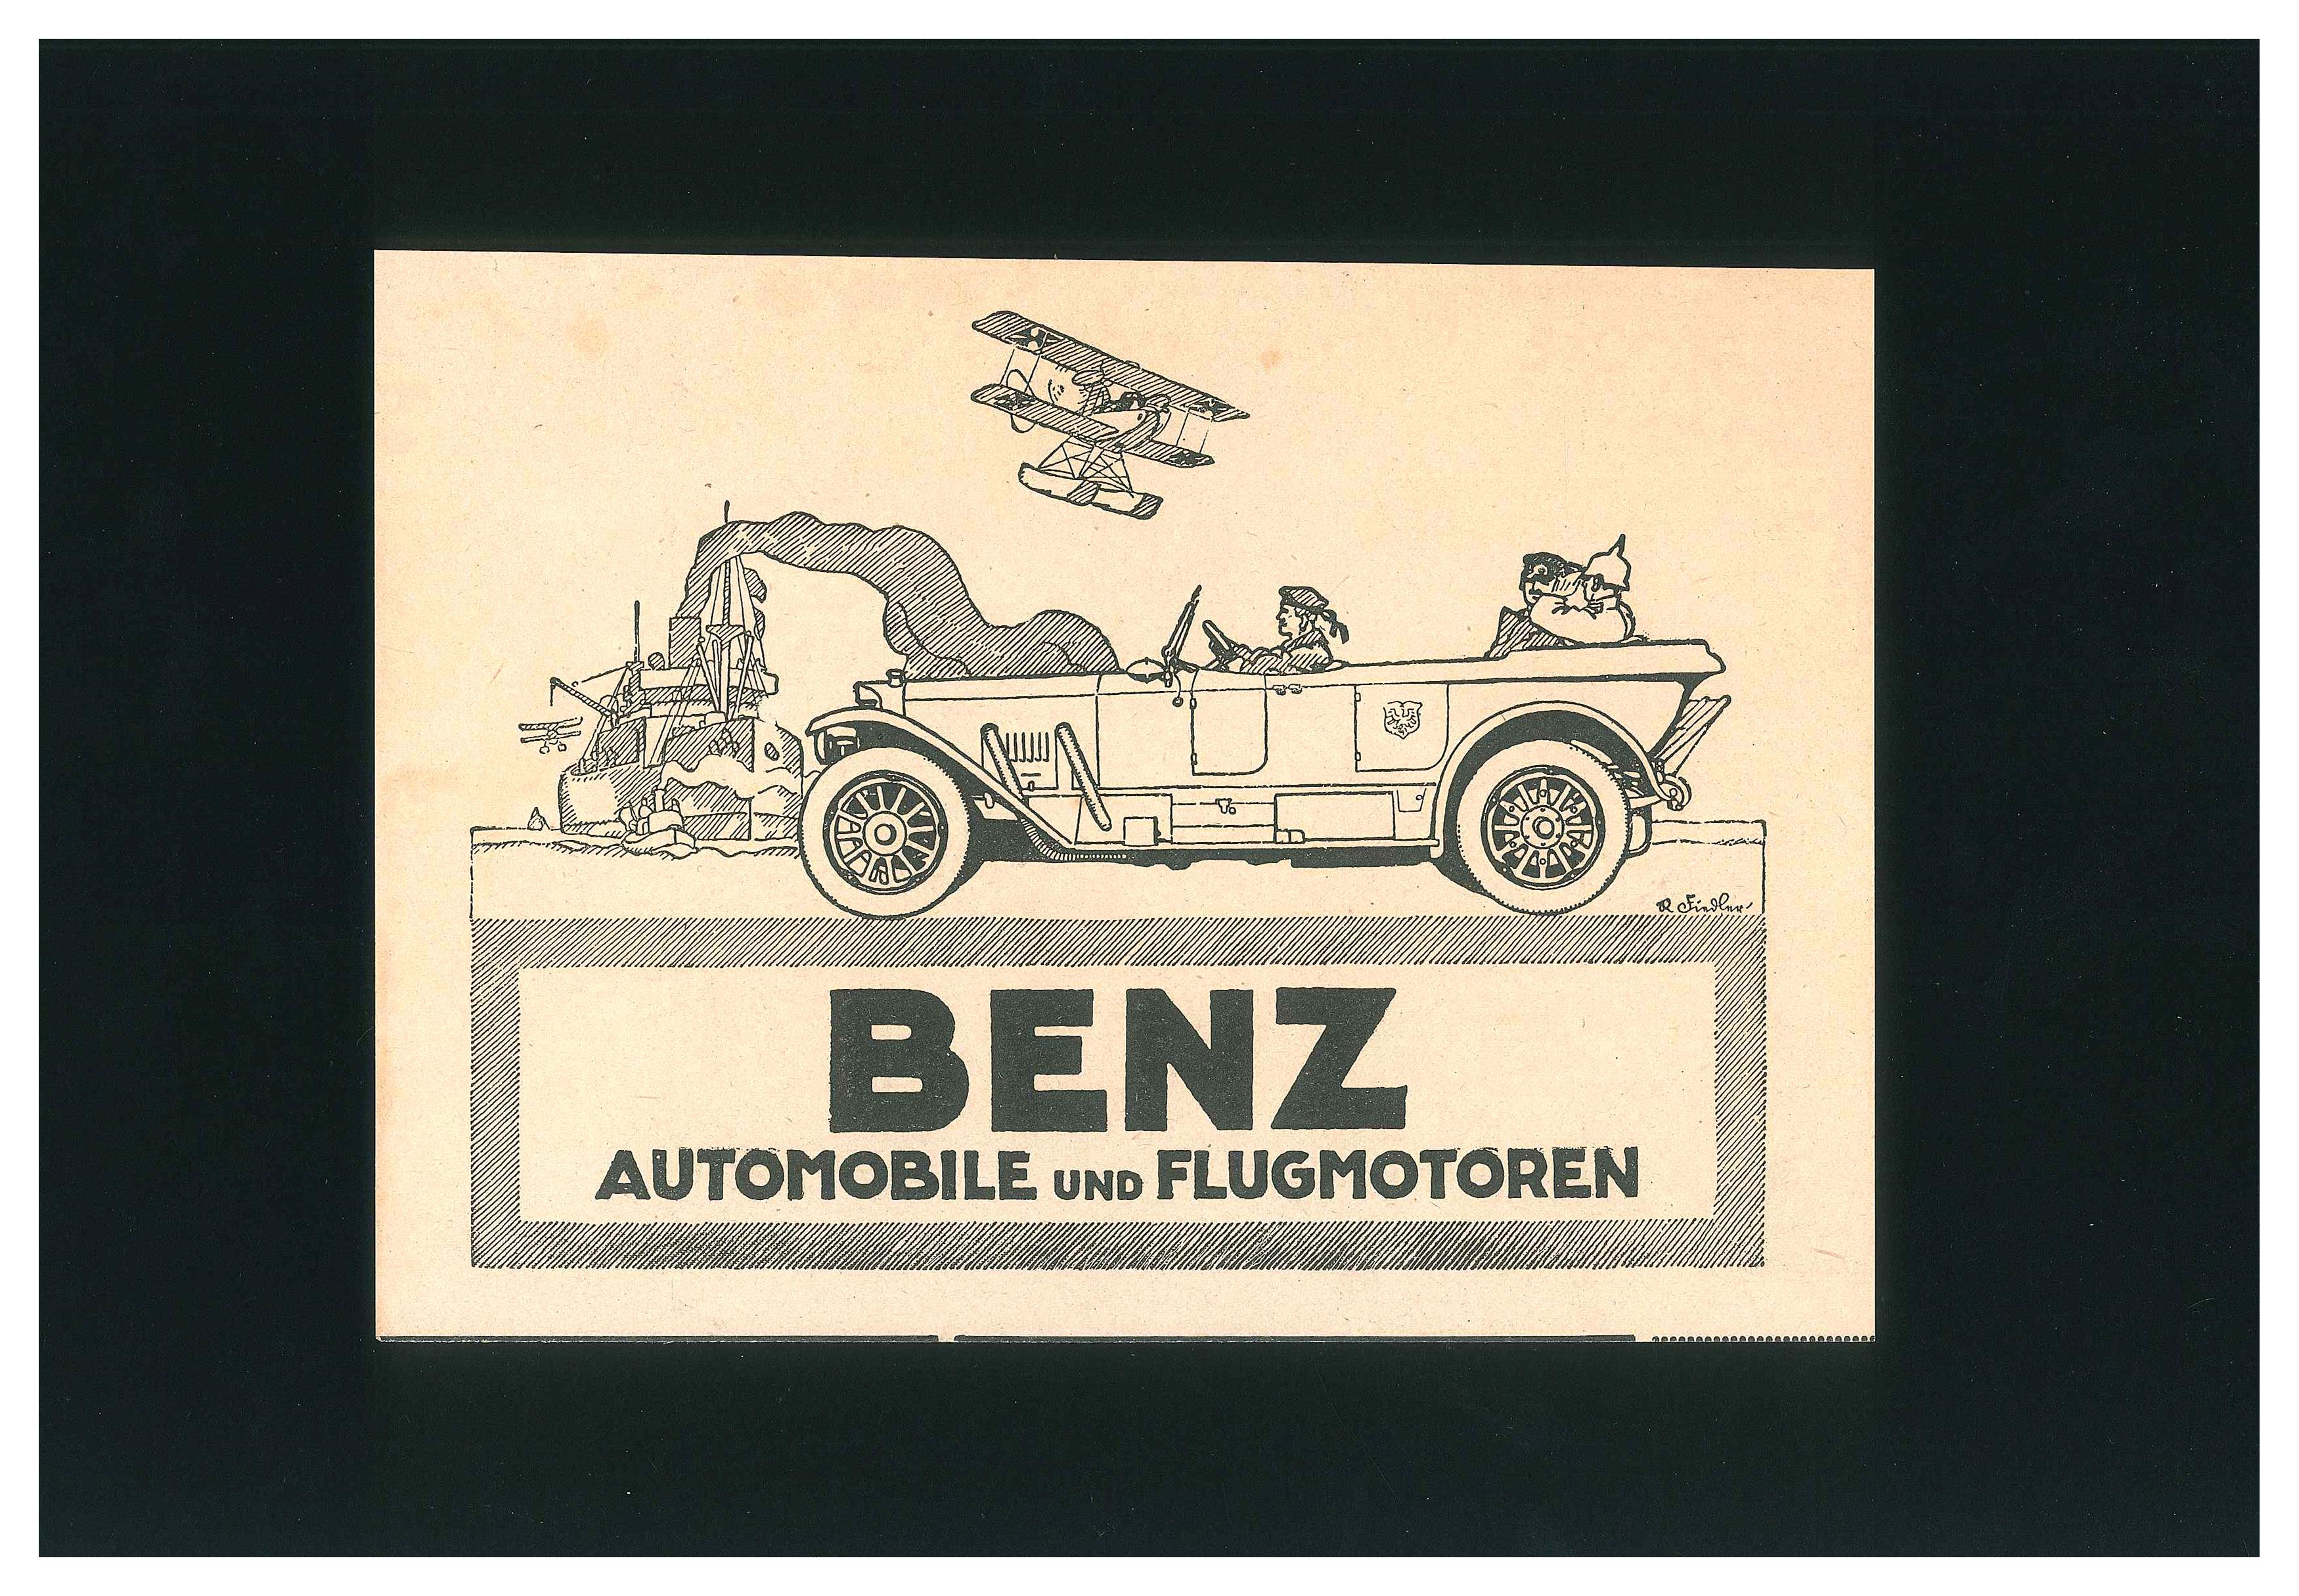 Benz Automobile Advertising - Original Vintage Advertising on Paper - 1910/20 - Art by Unknown